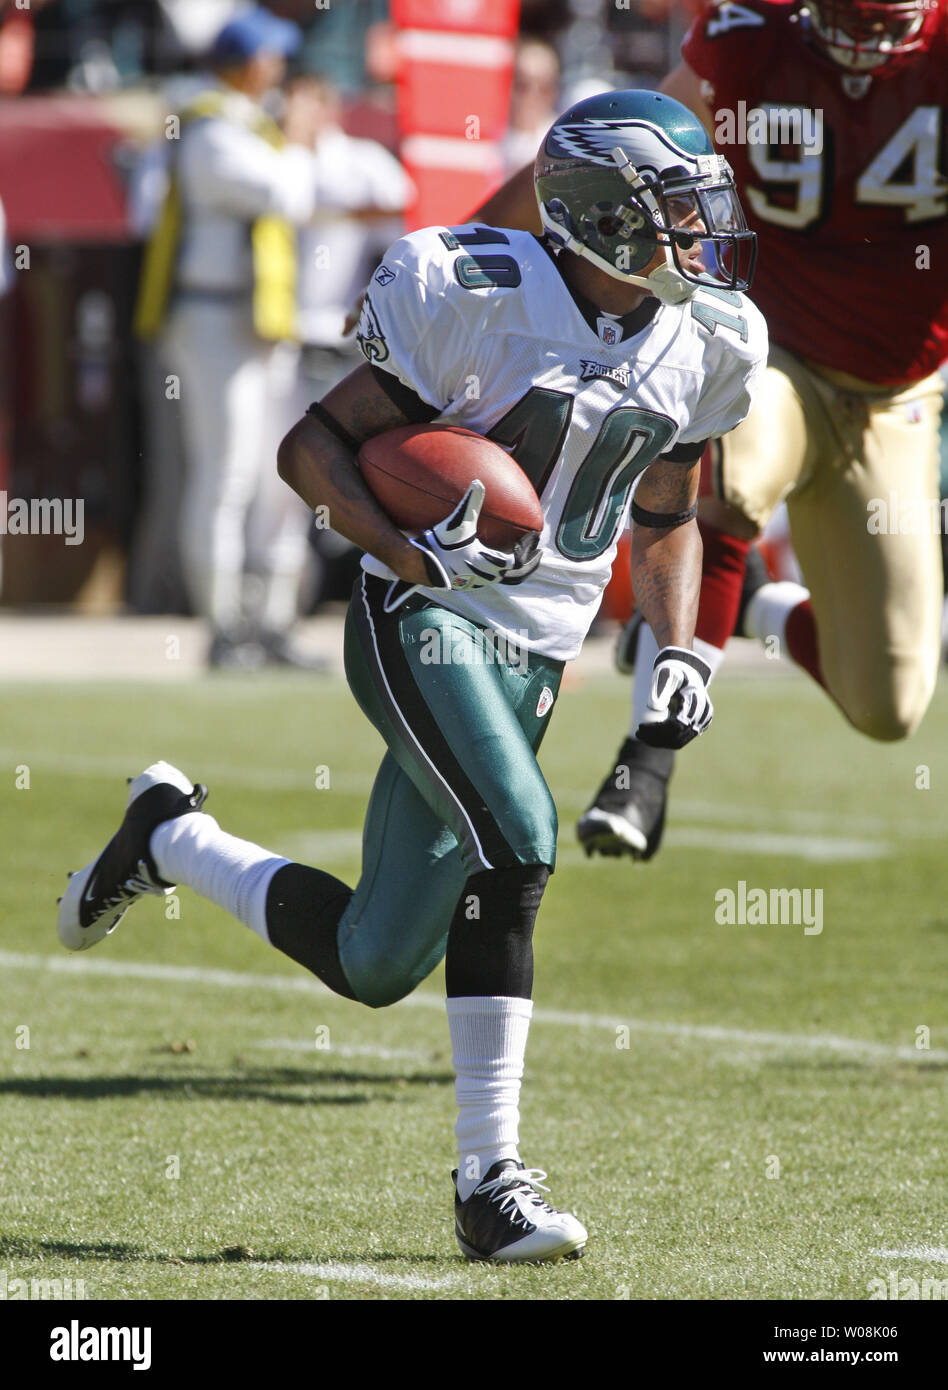 Philadelphia Eagles WR DeSean Jackson (10) runs with a Donovan McNabb pass against the San Francisco 49ers at Candlestick Park in San Francisco on October 12, 2008. The Eagles defeated the 49ers 40-26.  (UPI Photo/Terry Schmitt) Stock Photo